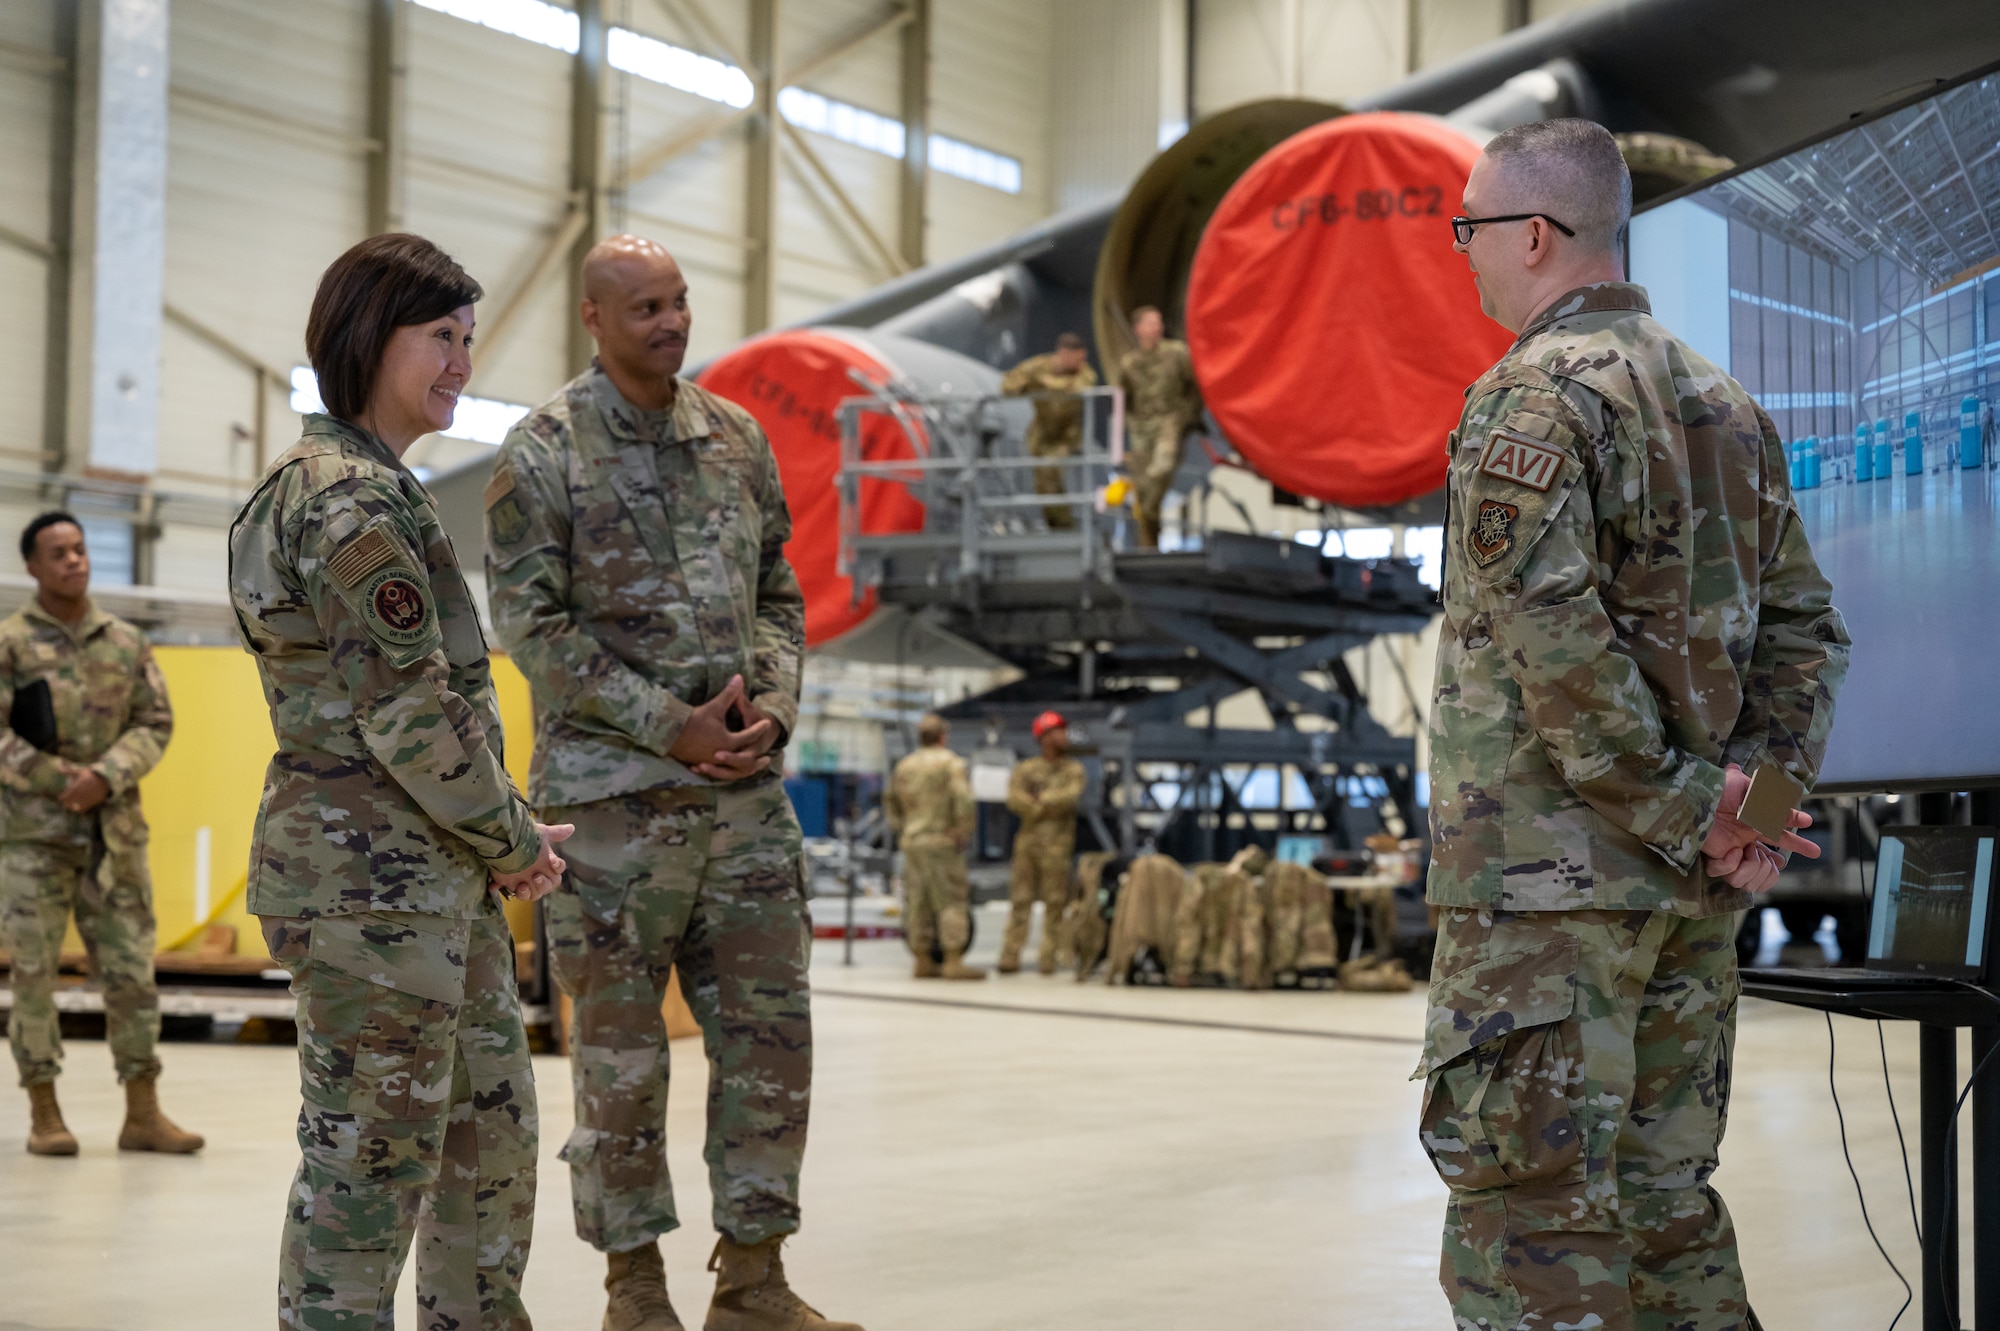 Chief Master Sgt. of the Air Force JoAnne S. Bass meets with Airmen